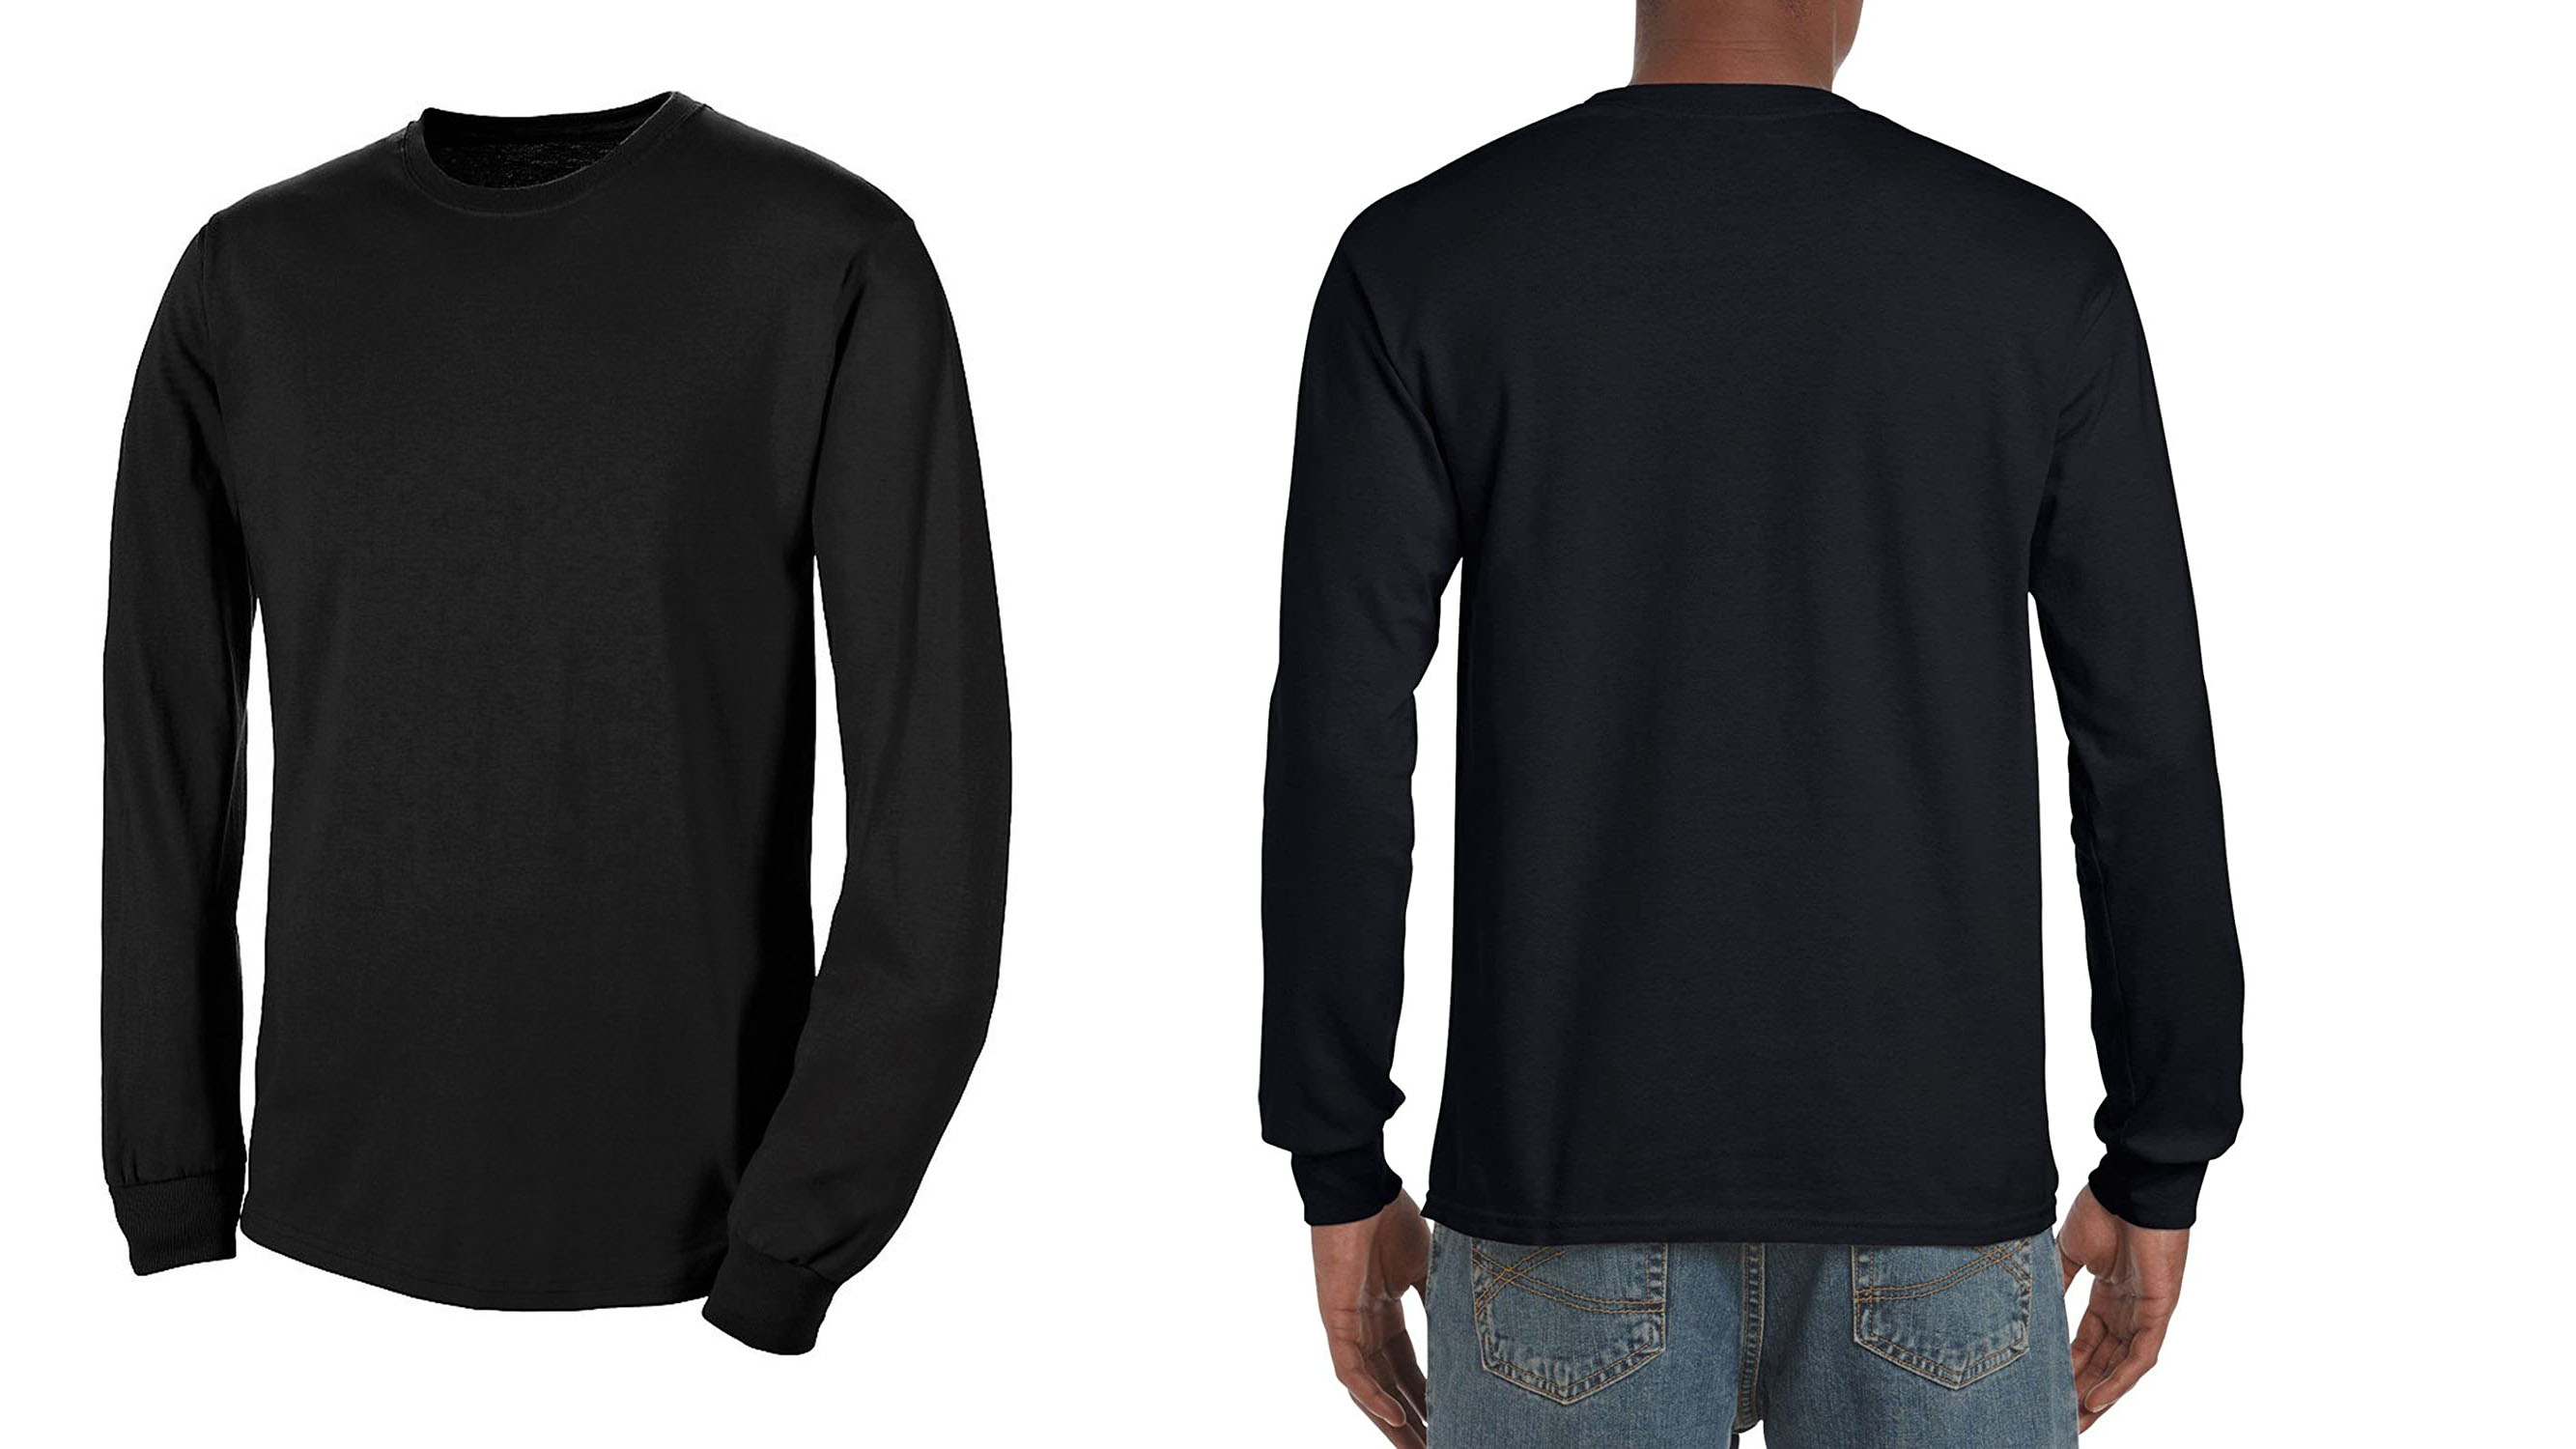 eco friendly corporate gifts design your own long sleeve shirt 2021